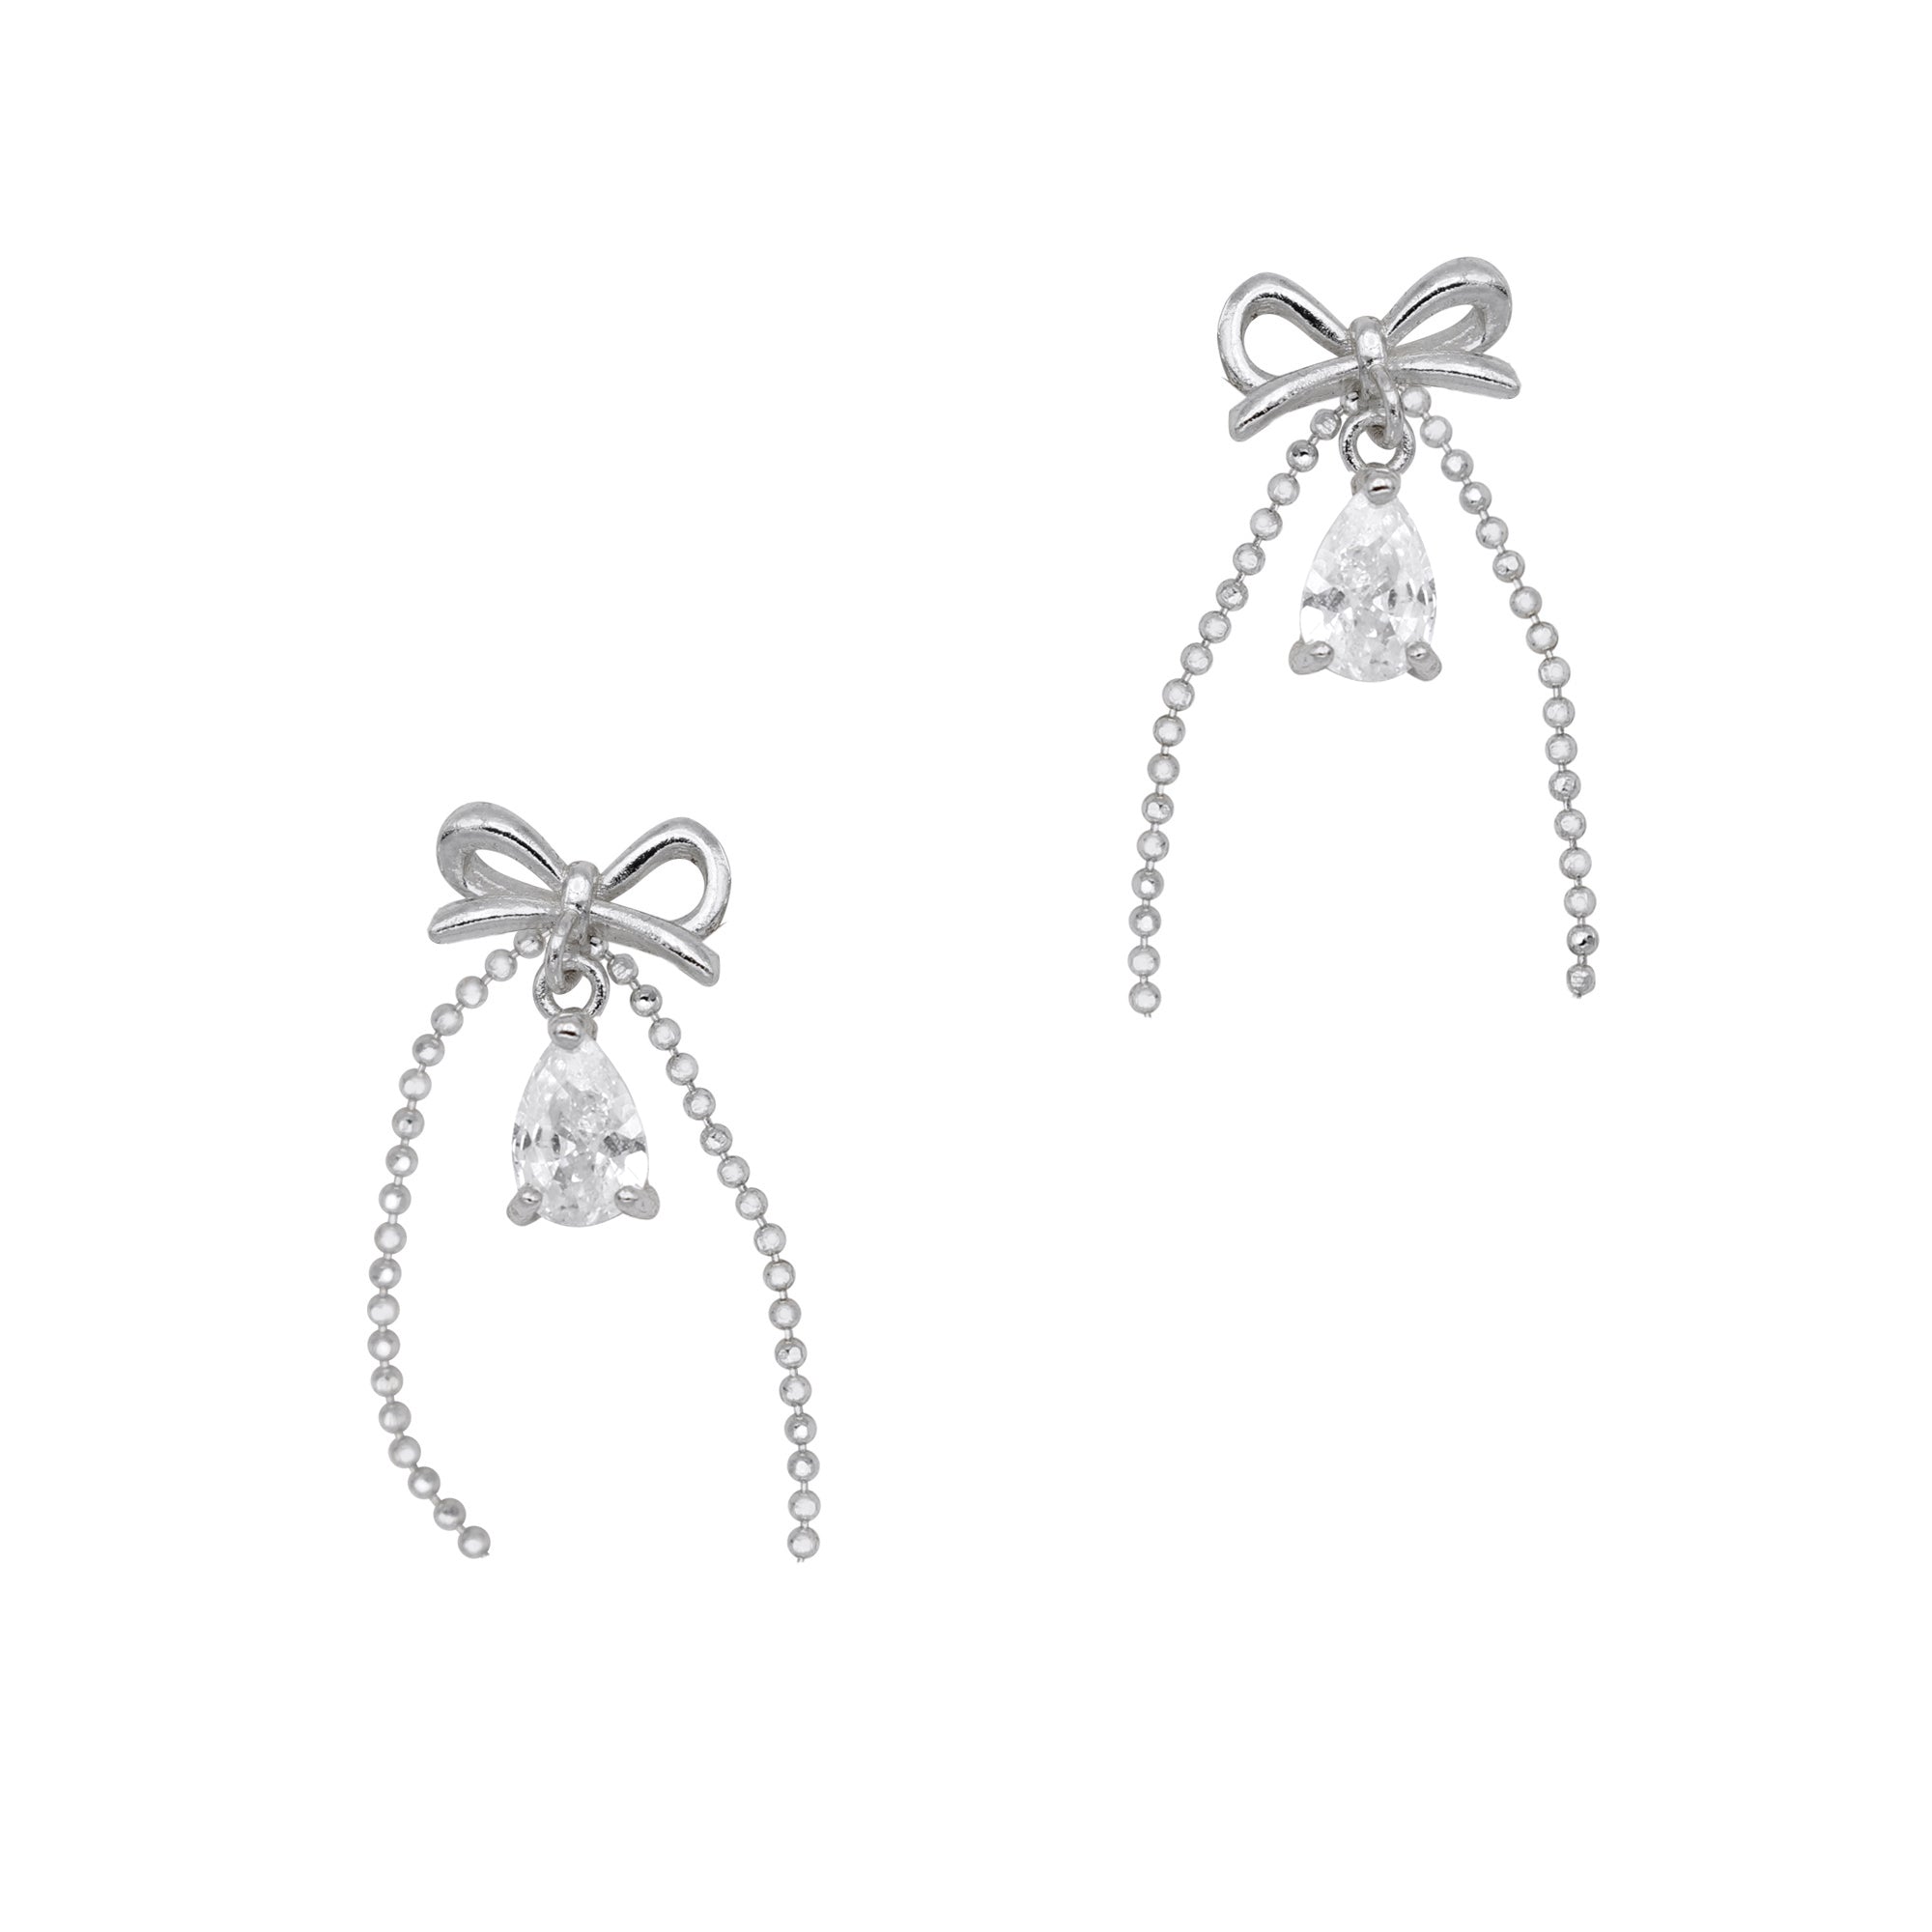 Lovely Bow Dangle / Zircon Charm / Silver Coquette Nail Art Jewelry